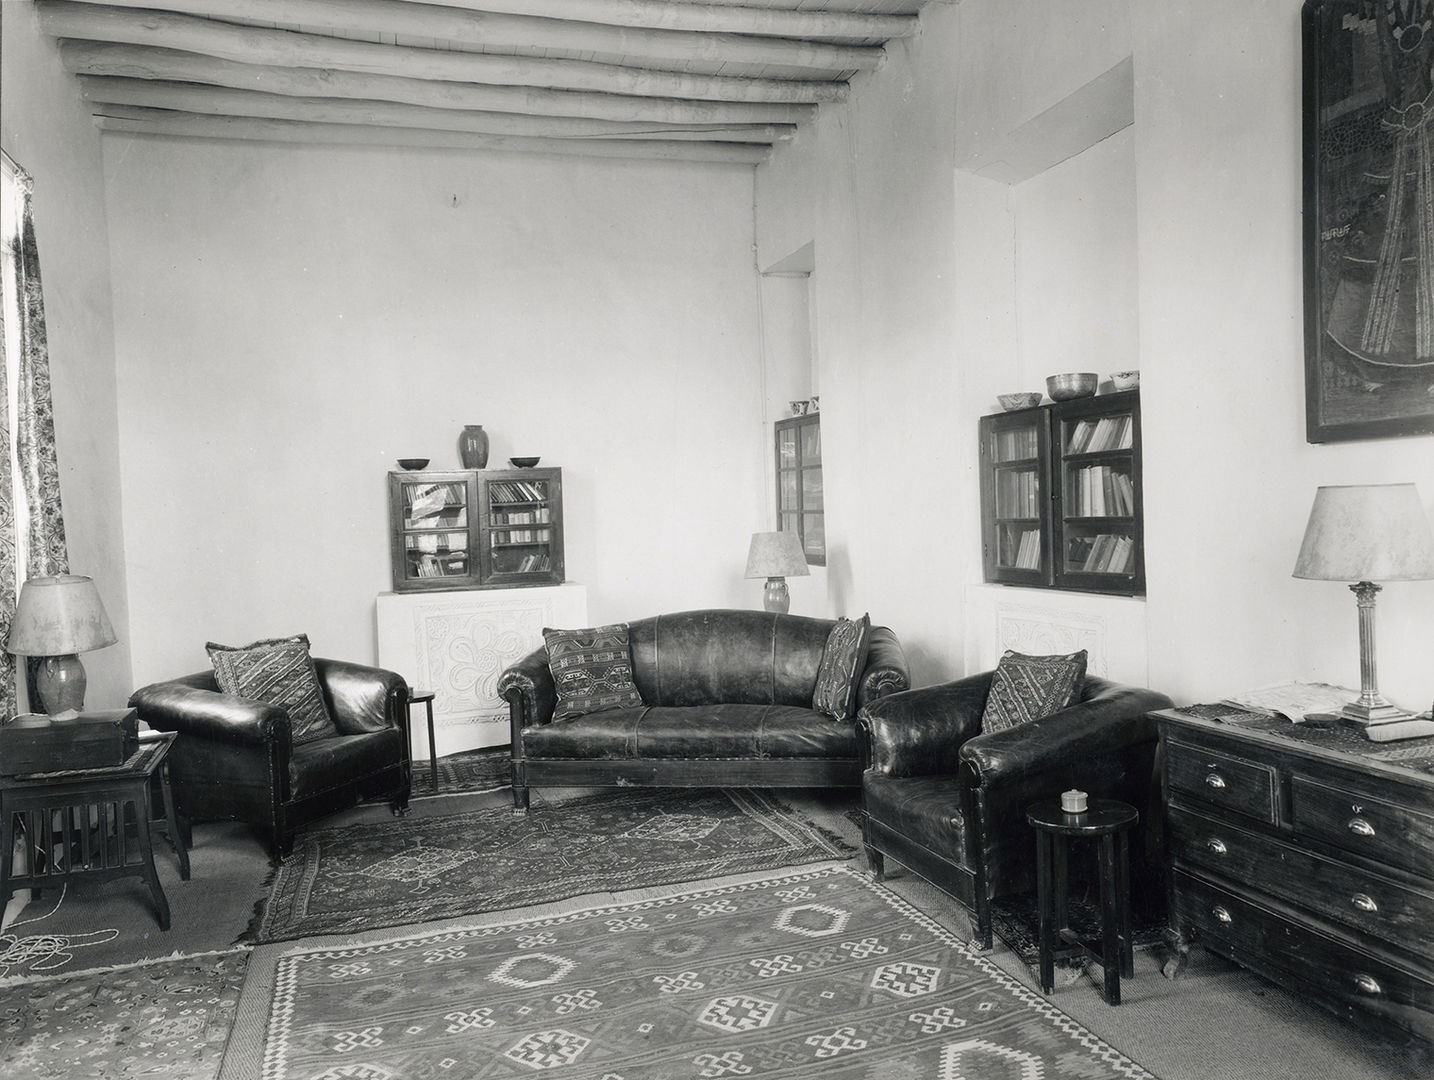 Black and white image of a living room with a couch, two arm chairs, wall cabinets, and side tables with lamps